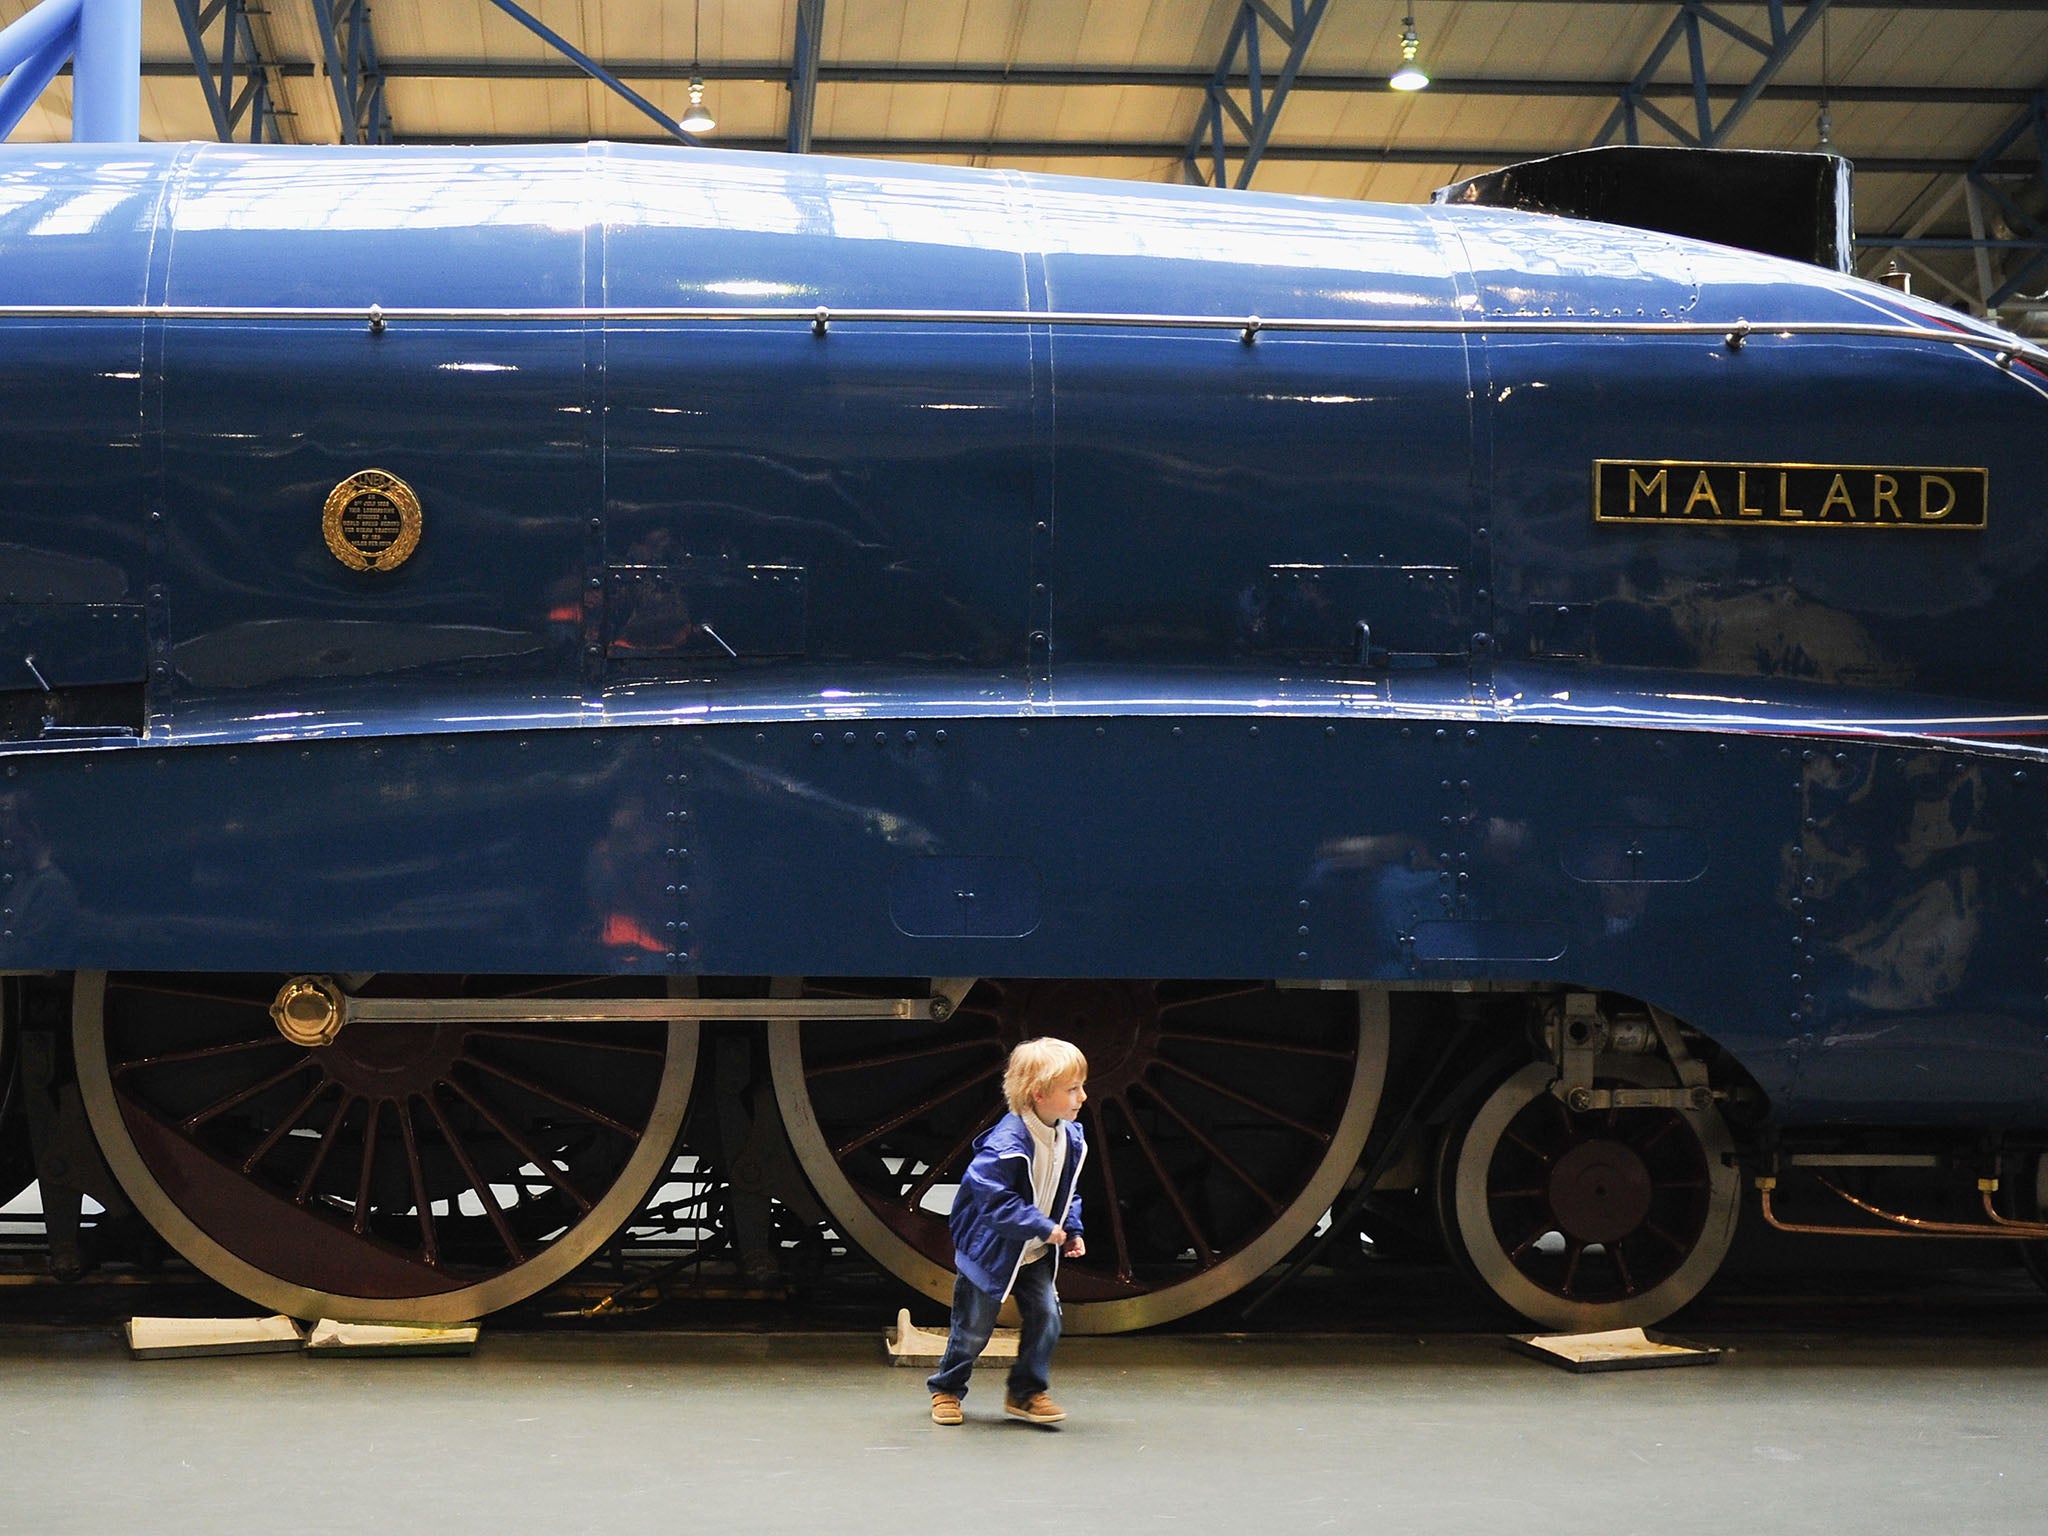 A child plays next to the Mallard?at the National Railway Museum. The train was the fastest steam locomotive that was built on 3 March 1938